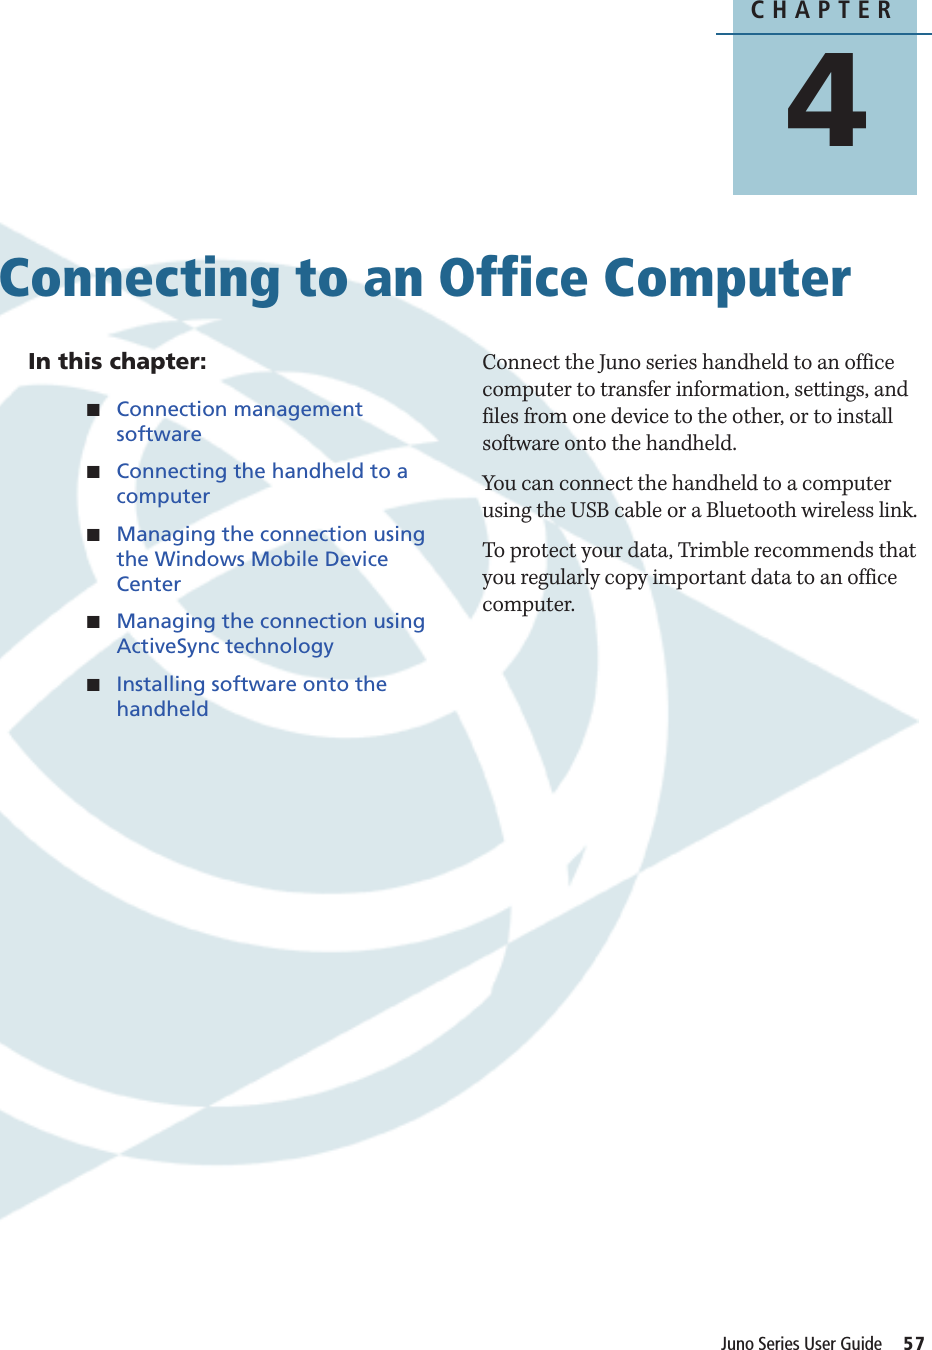 CHAPTER4Juno Series User Guide     57Connecting to an Office Computer 4In this chapter:QConnection management softwareQConnecting the handheld to a computerQManaging the connection using the Windows Mobile Device CenterQManaging the connection using ActiveSync technologyQInstalling software onto the handheldConnect the Juno series handheld to an office computer to transfer information, settings, and files from one device to the other, or to install software onto the handheld.You can connect the handheld to a computer using the USB cable or a Bluetooth wireless link.To protect your data, Trimble recommends that you regularly copy important data to an office computer.